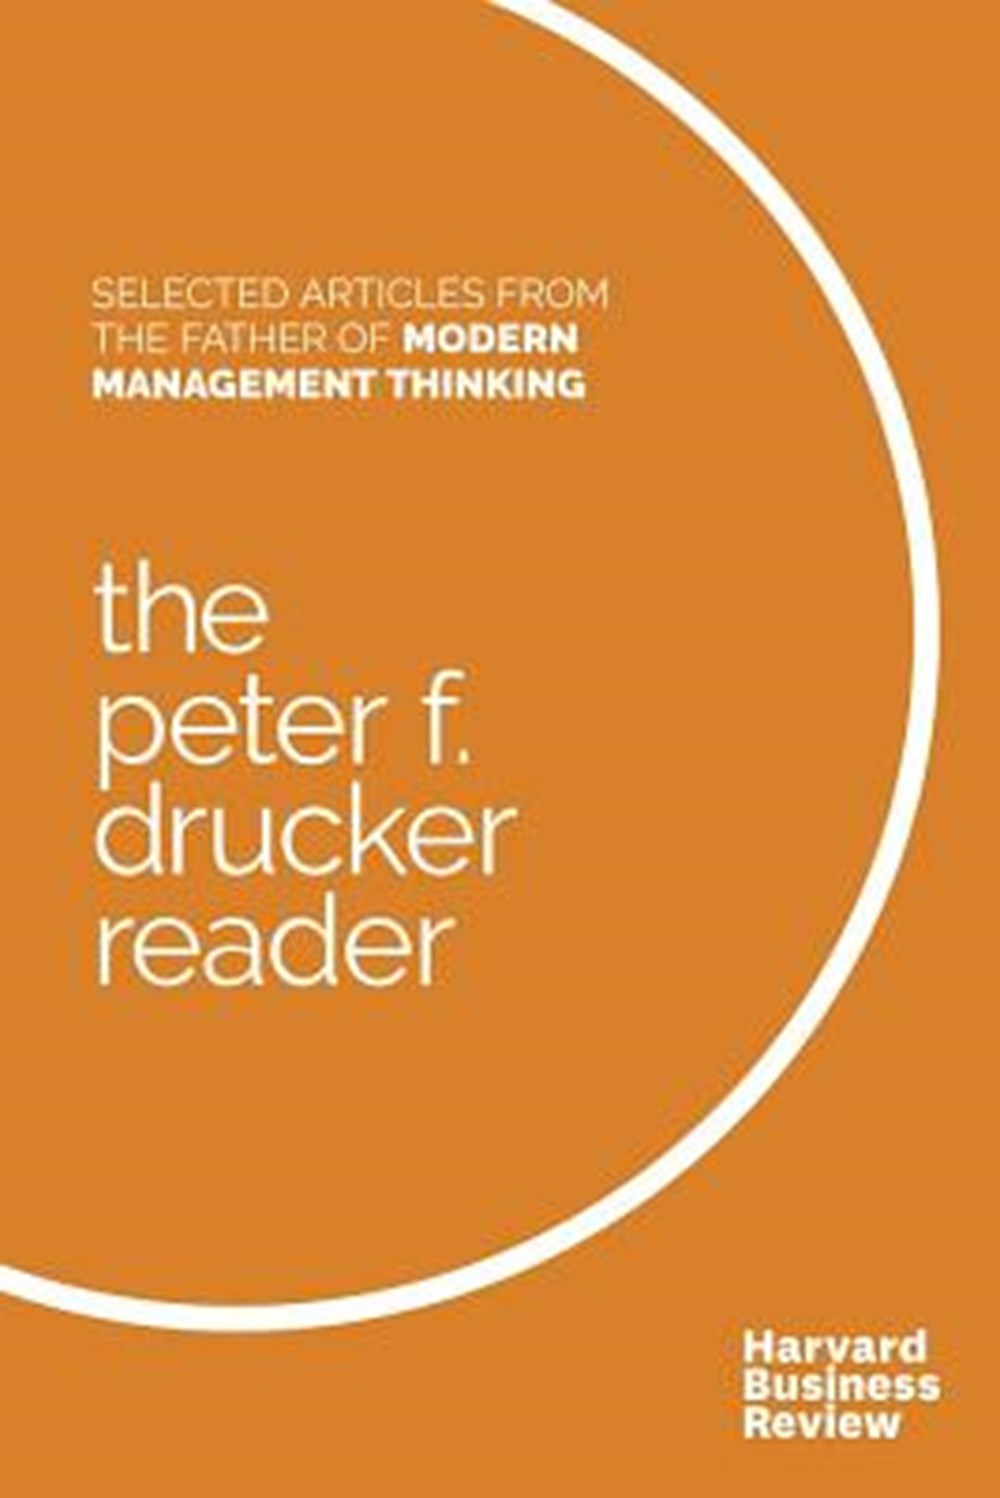 Peter F. Drucker Reader Selected Articles from the Father of Modern Management Thinking